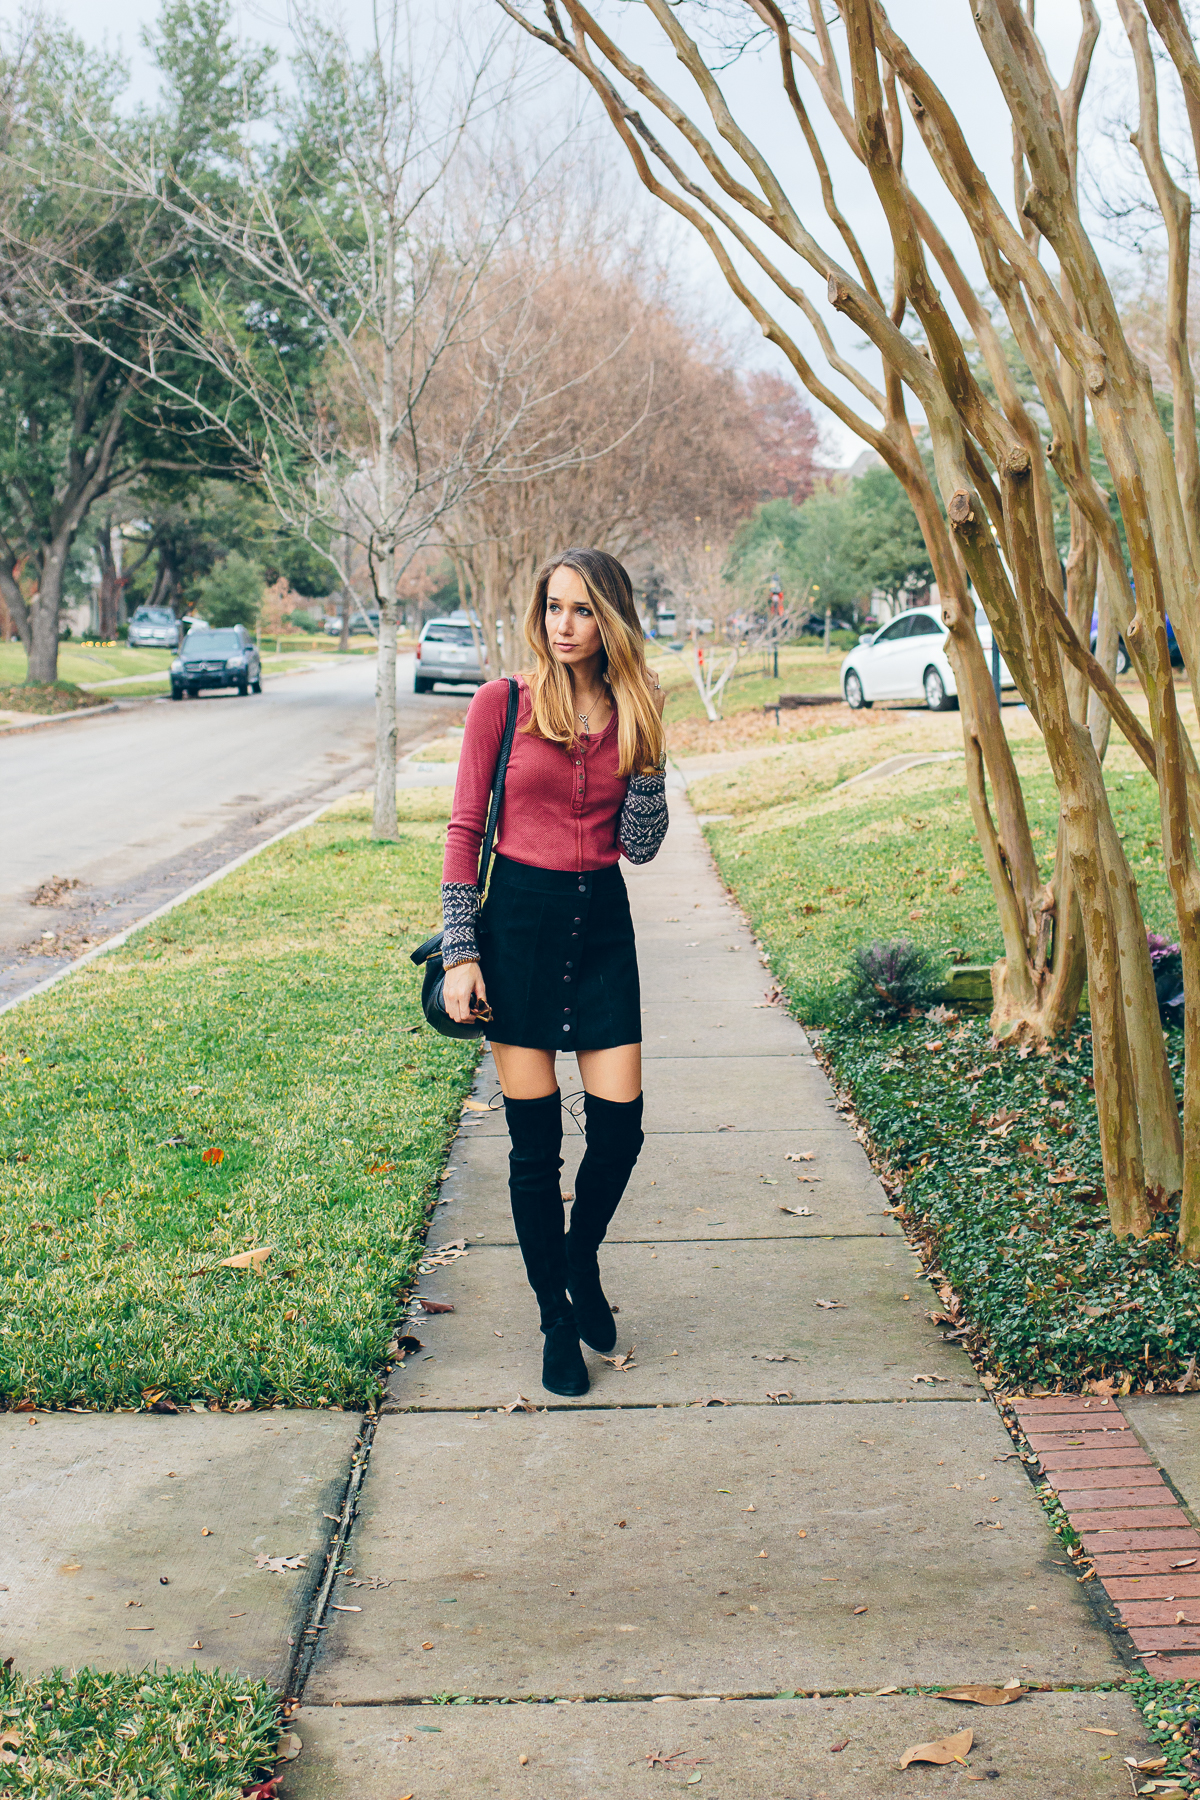 mini skirt with boots outfit